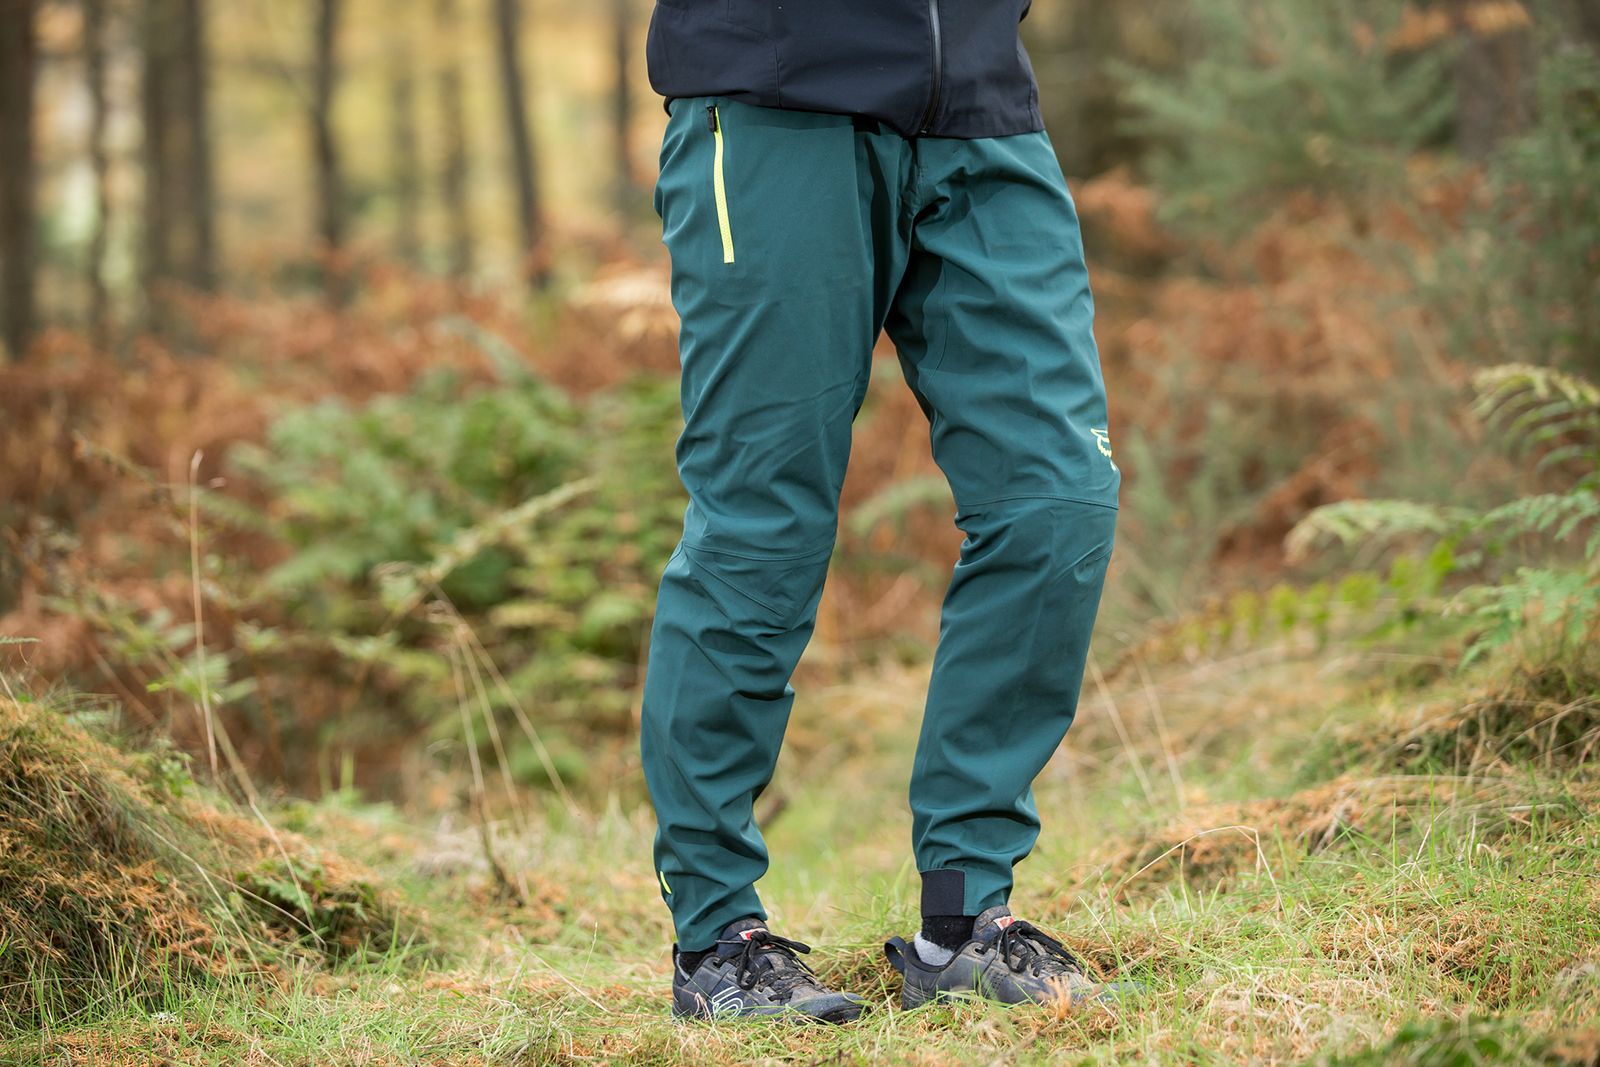 Group test: Men's cycling trousers